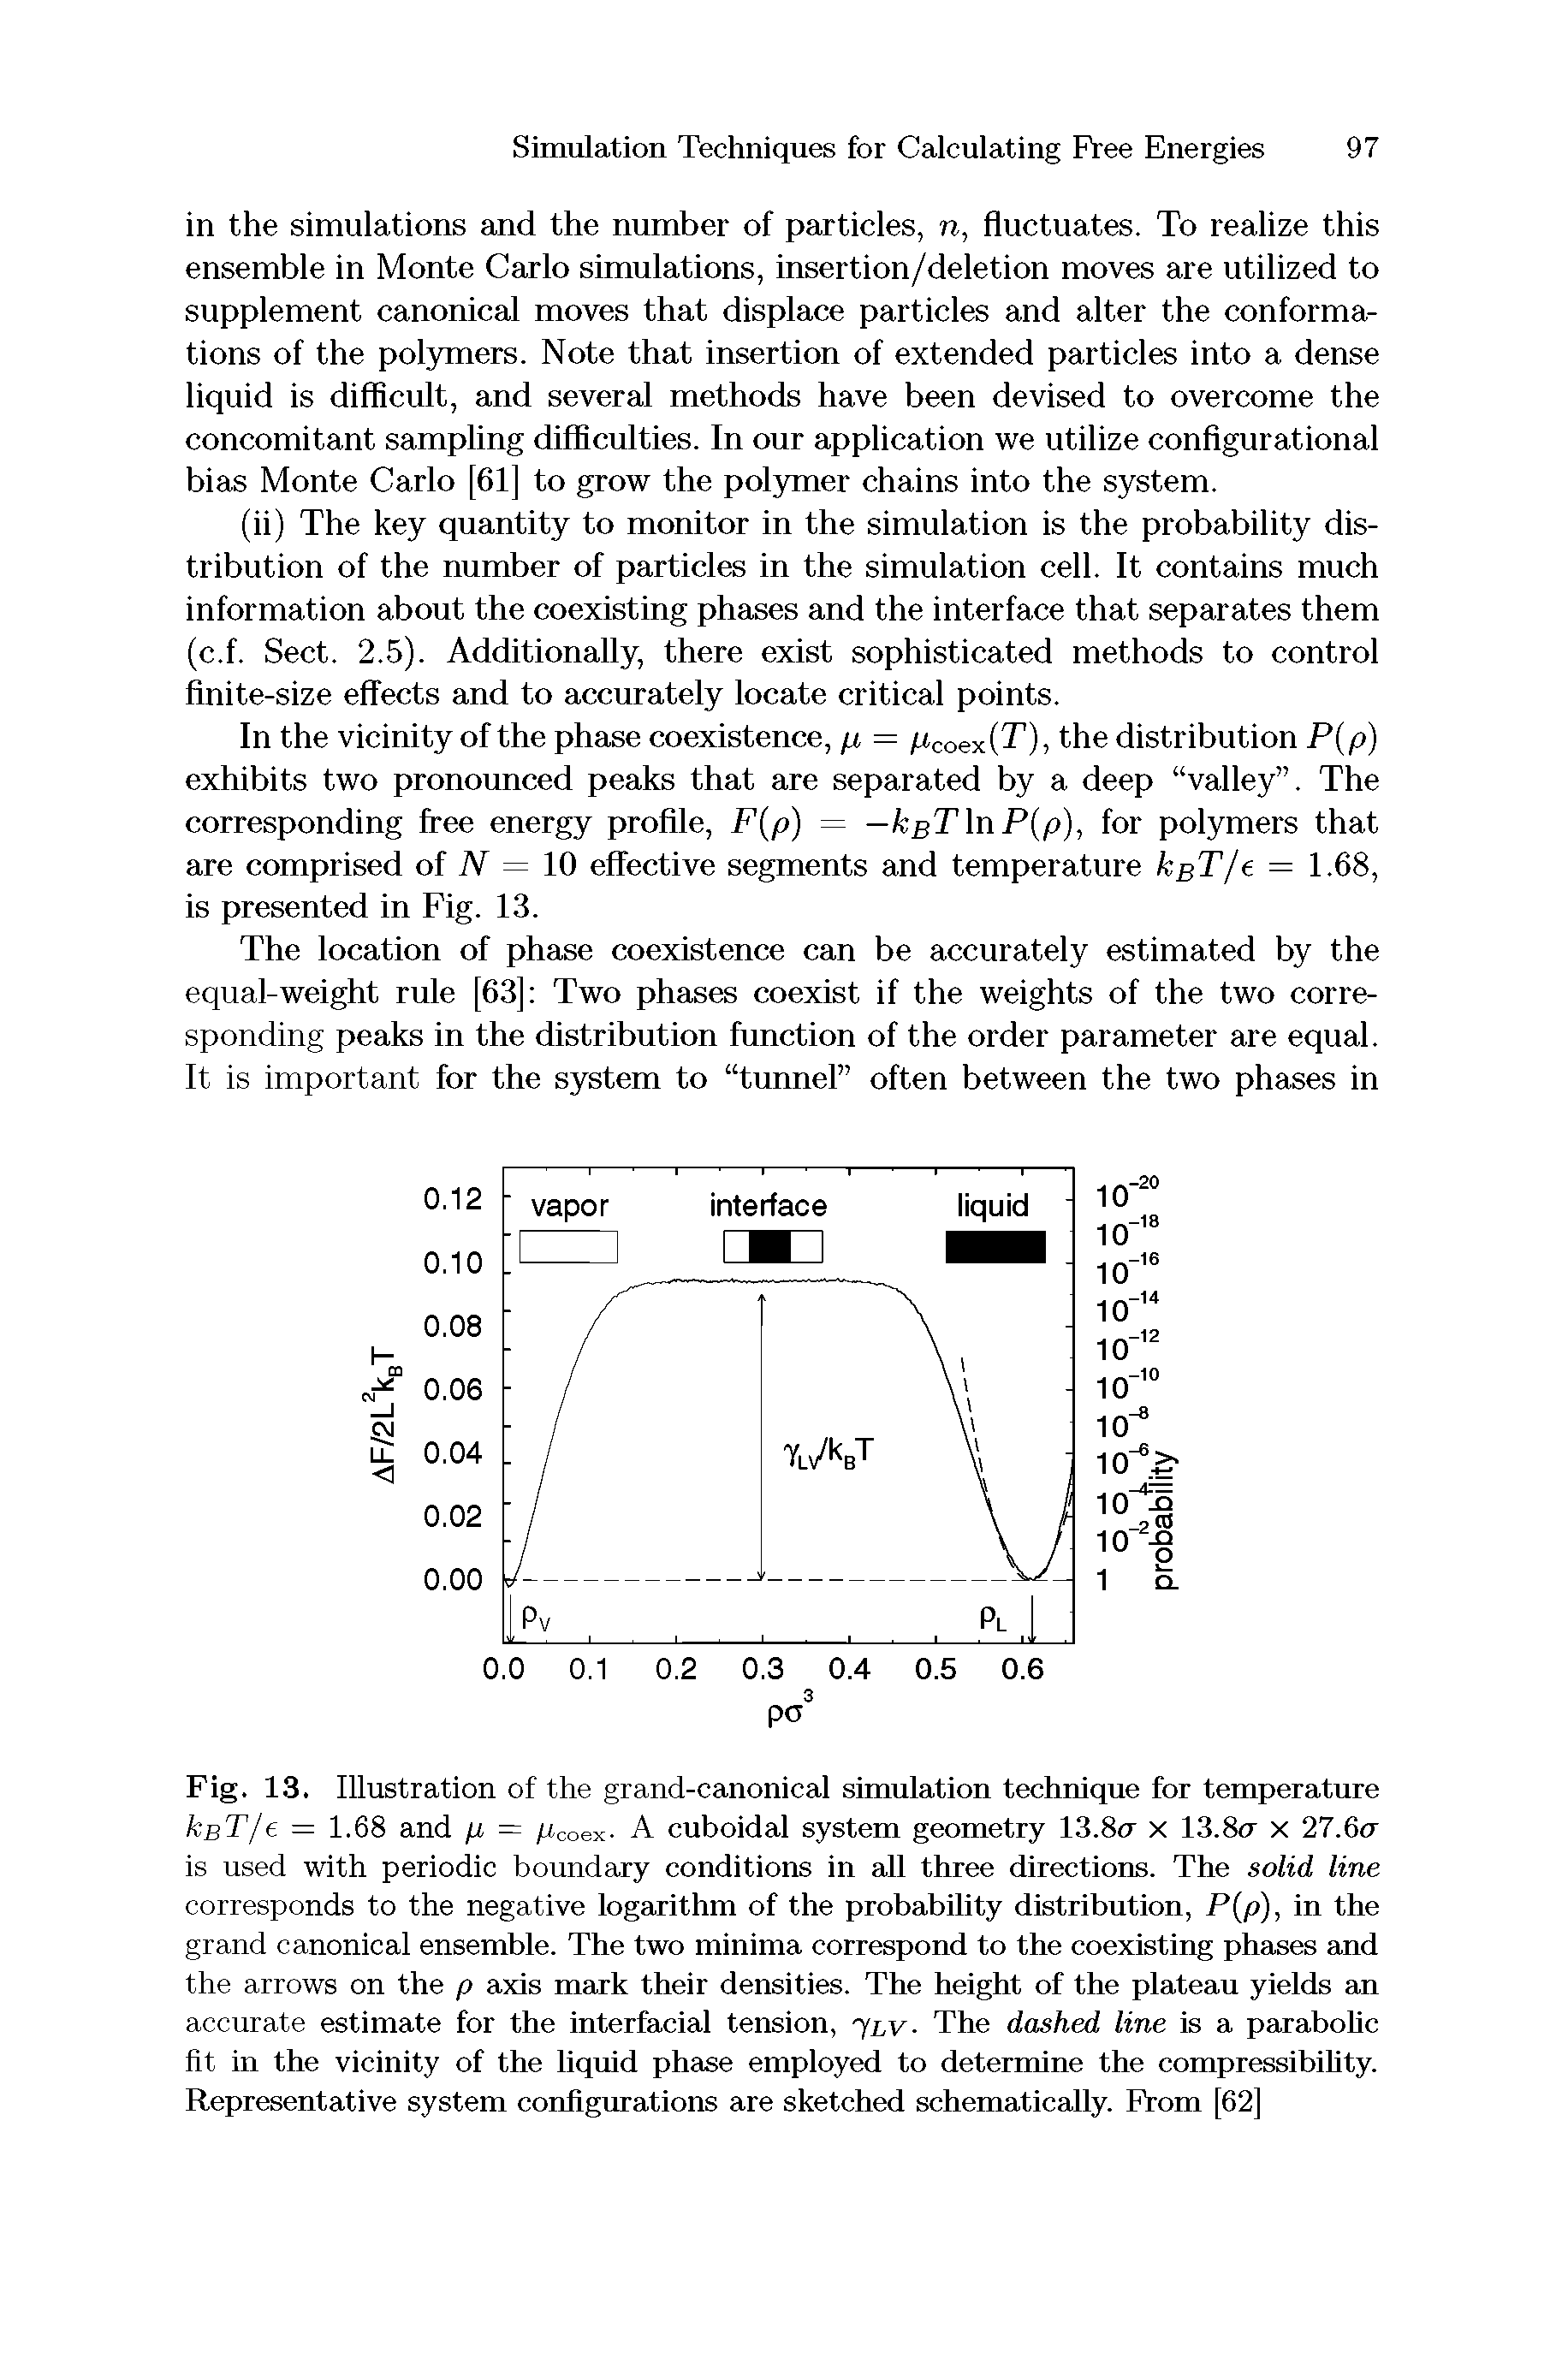 Fig. 13. Illustration of the grand-canonical simulation technique for temperature UbT/e = 1.68 and p = pcoex- A cuboidal system geometry 13.8cr x 13.8cr x 27.6cr is used with periodic boundary conditions in all three directions. The solid line corresponds to the negative logarithm of the probability distribution, P p), in the grand canonical ensemble. The two minima correspond to the coexisting phases and the arrows on the p axis mark their densities. The height of the plateau yields an accurate estimate for the interfacial tension, yLV- The dashed line is a parabohc fit in the vicinity of the liquid phase employed to determine the compressibihty. Representative system configurations are sketched schematically. From [62]...